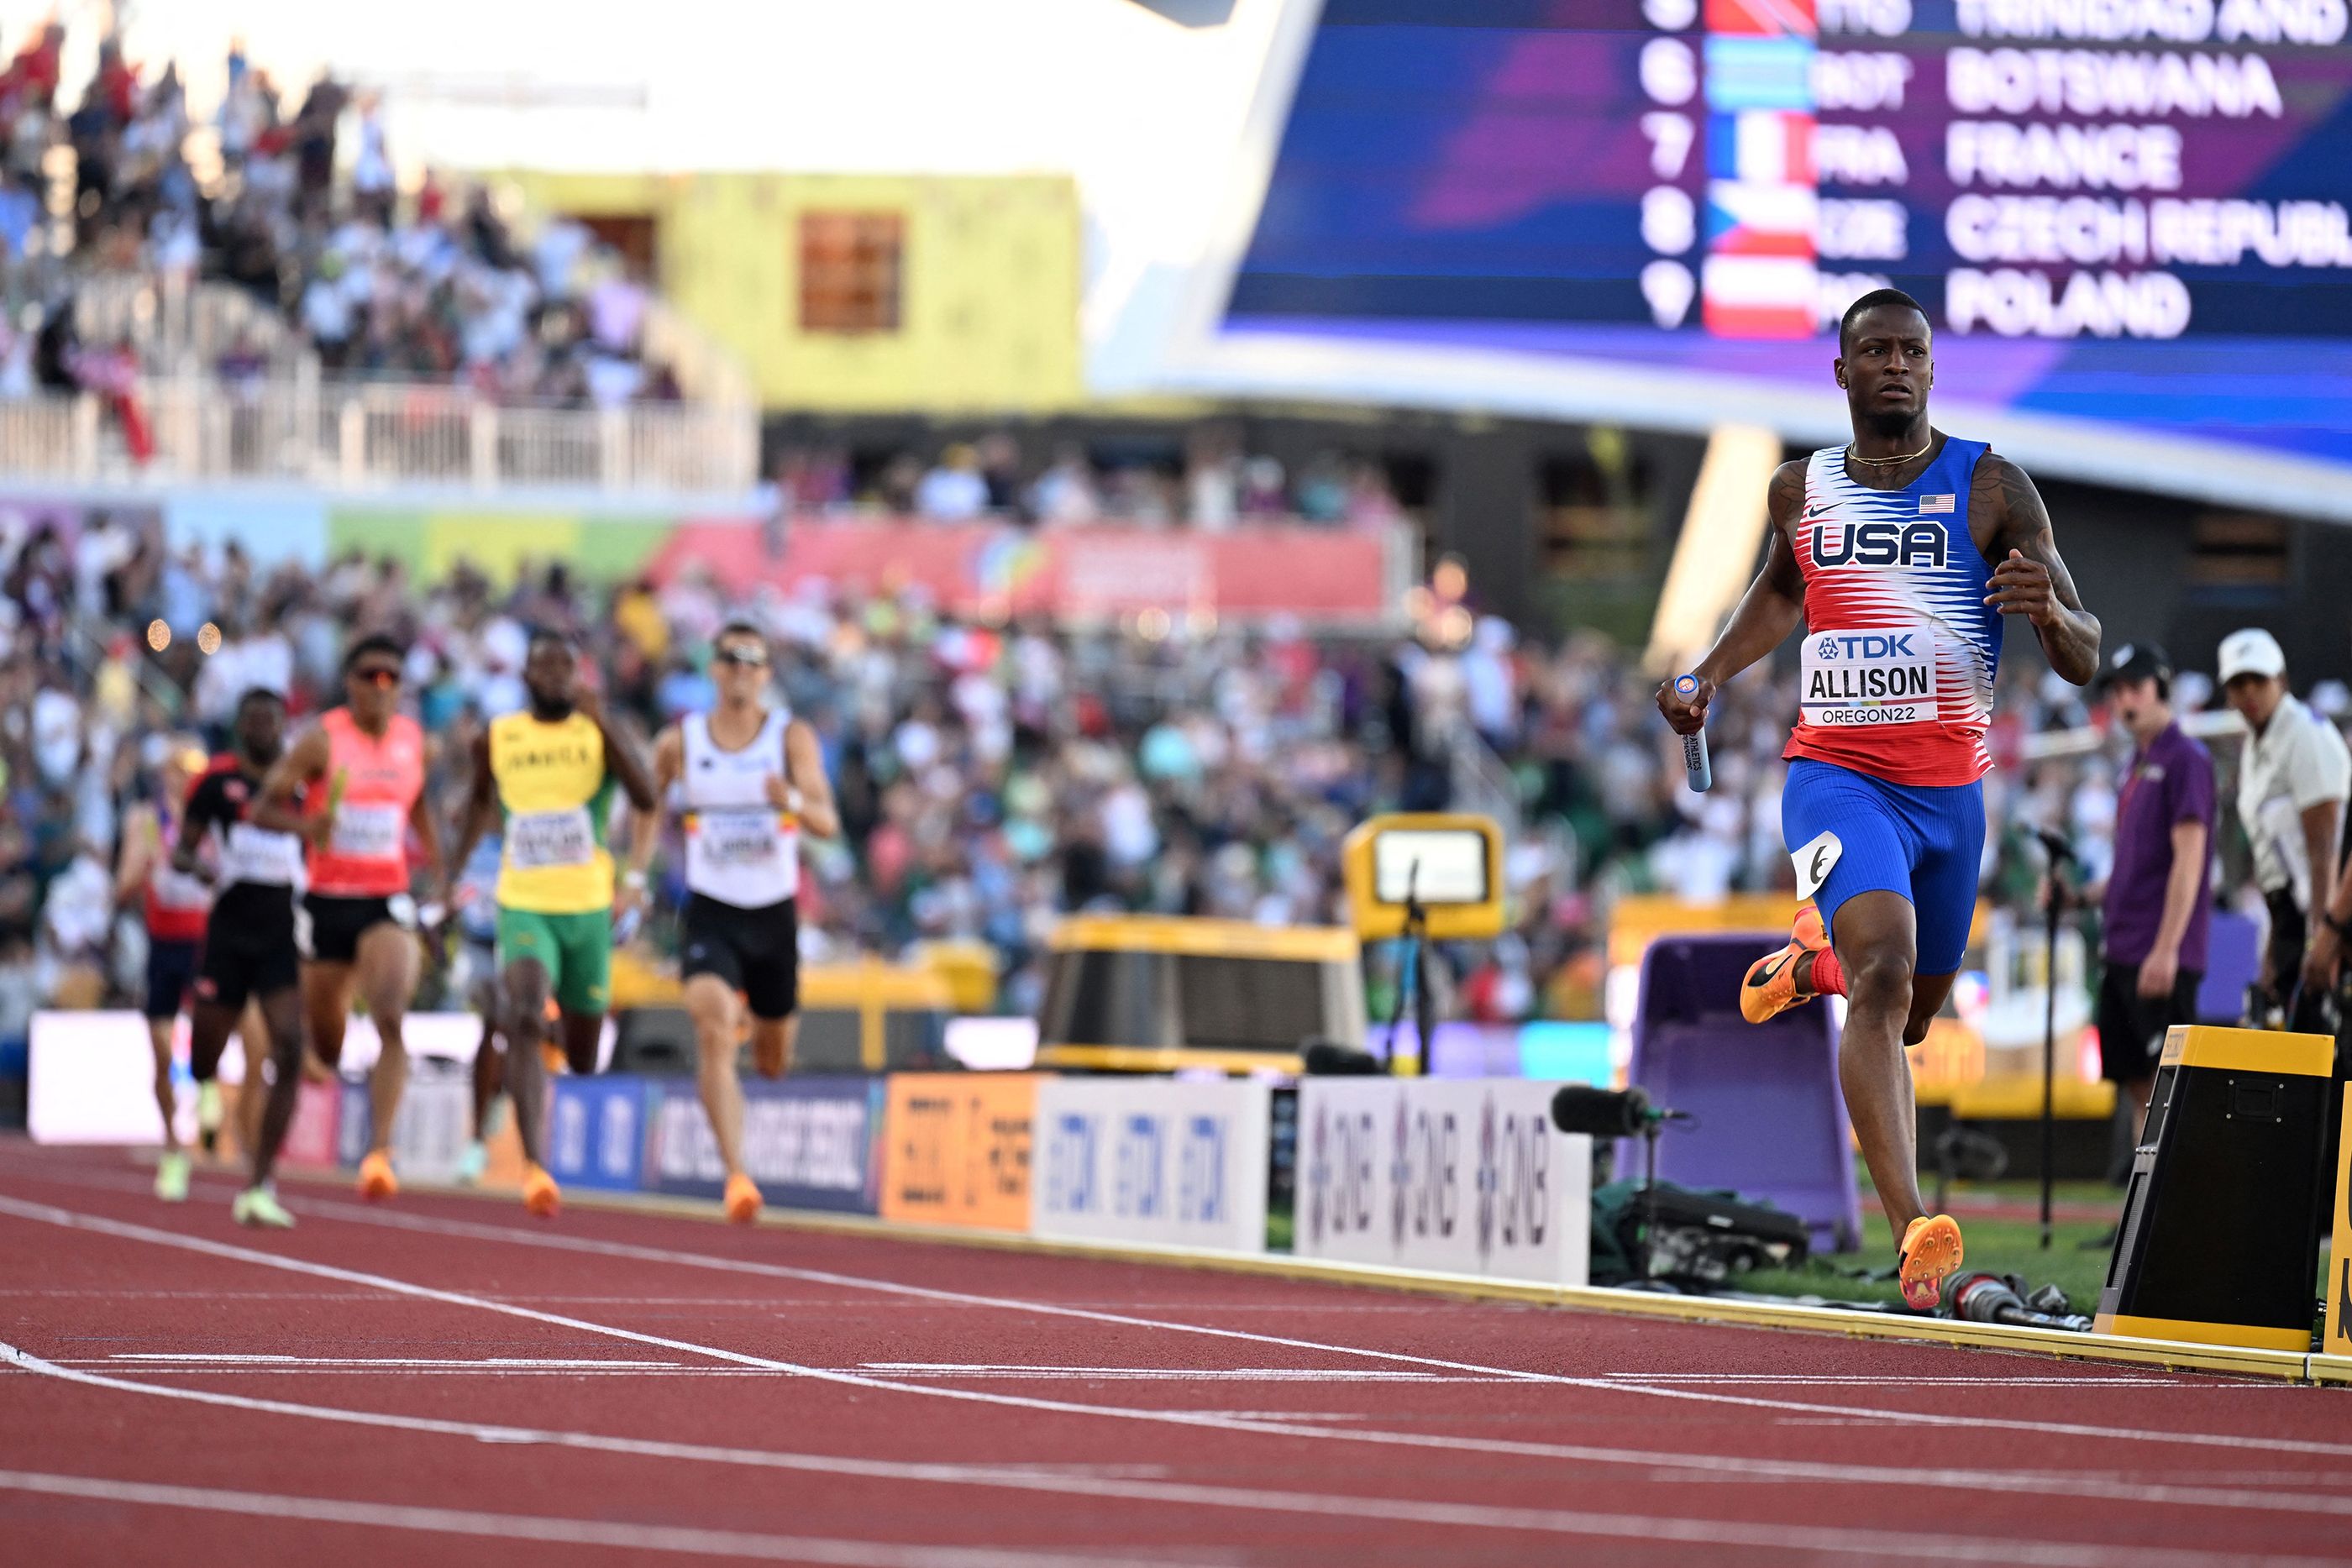 Champion Allison anchors USA to men's 4x400m victory in Oregon